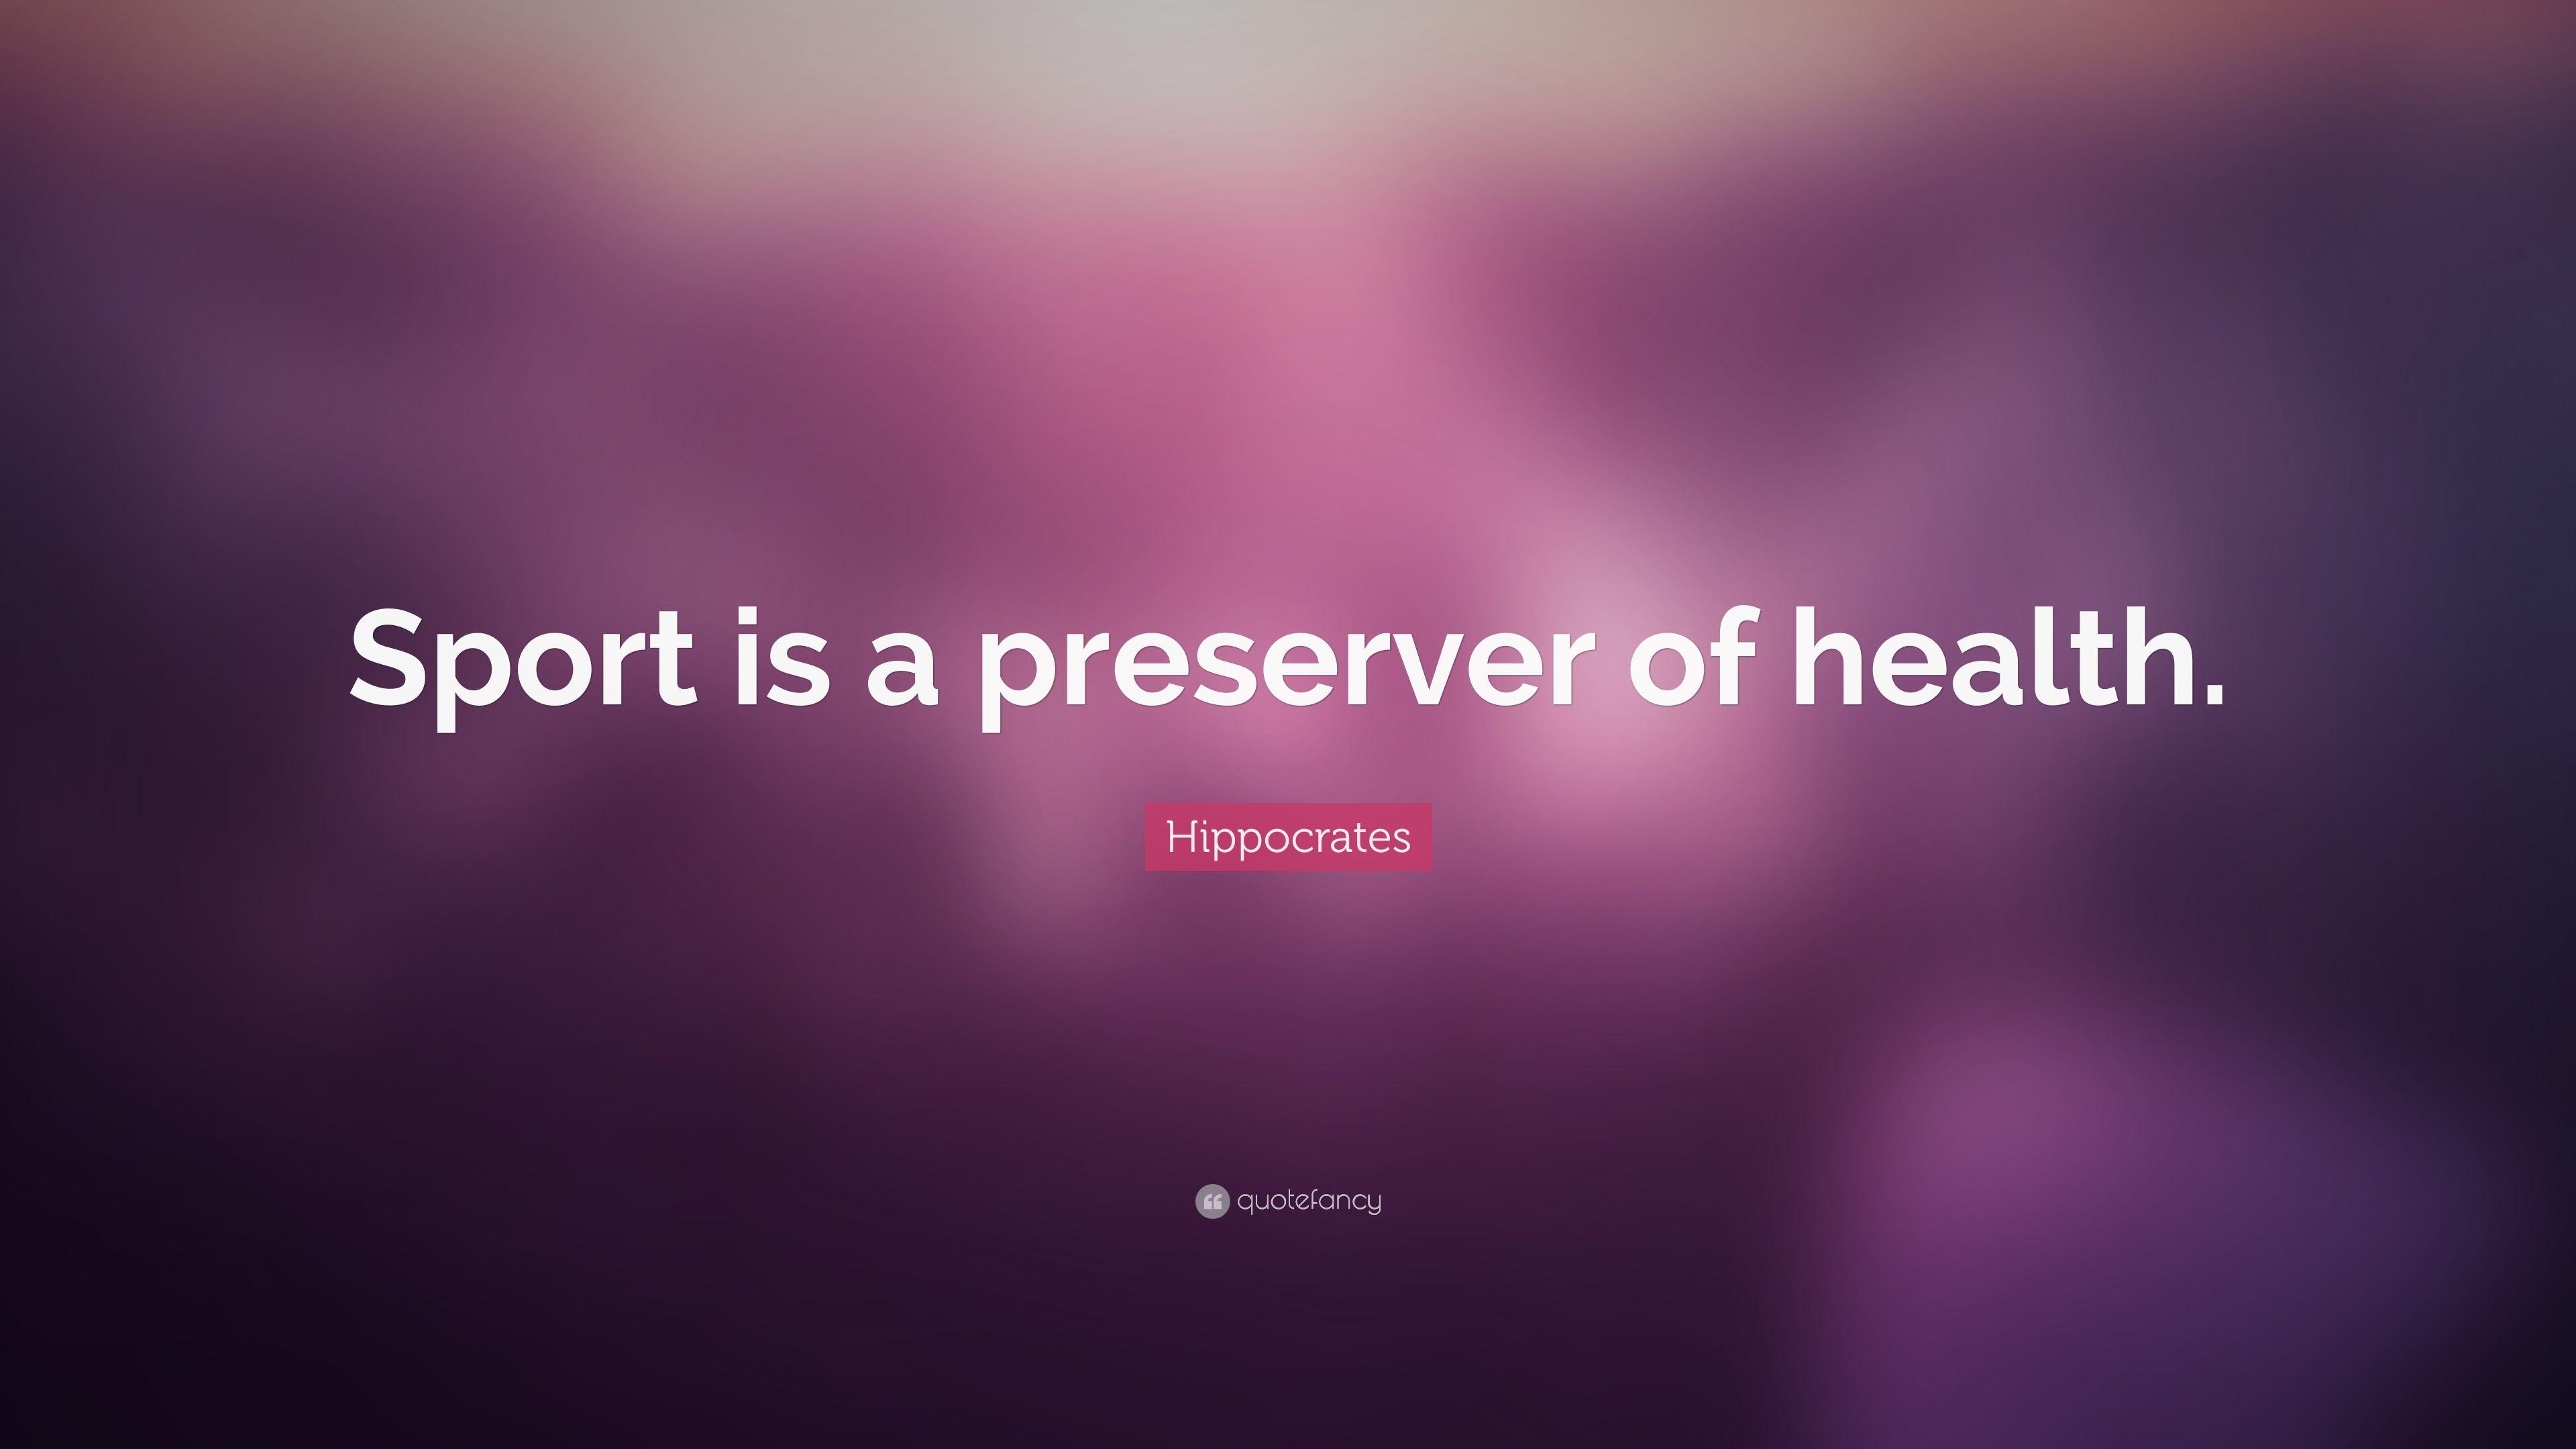 Hippocrates Quote: “Sport is a preserver of health.” 12 wallpaper